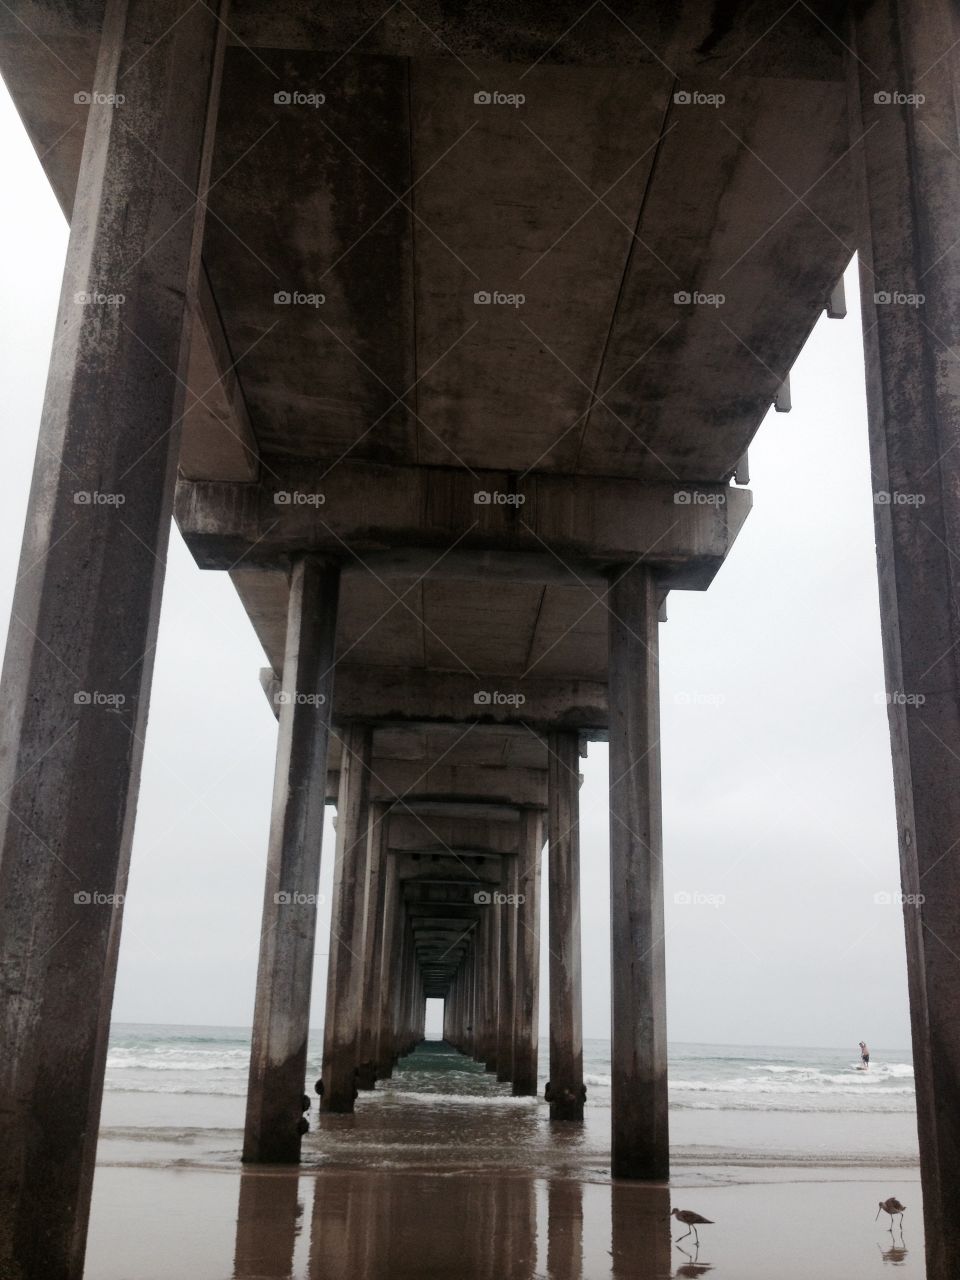 Reverse Entrance. Beach walking in California. The moment I exhaled.